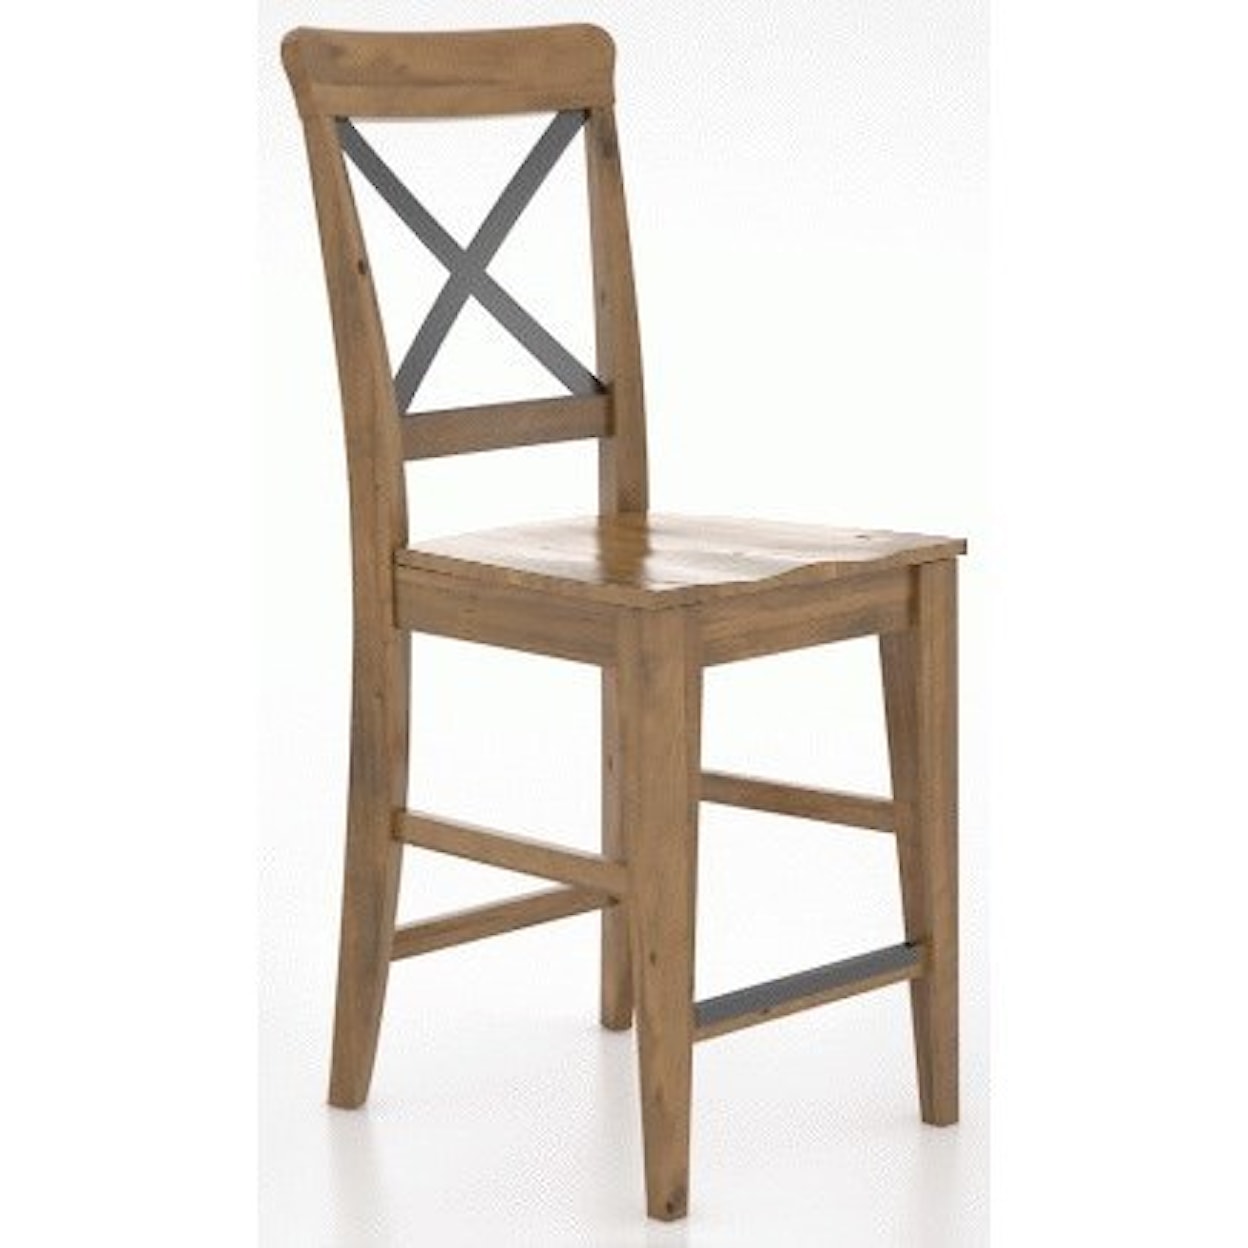 Canadel East Side Customizable X-Back Stool